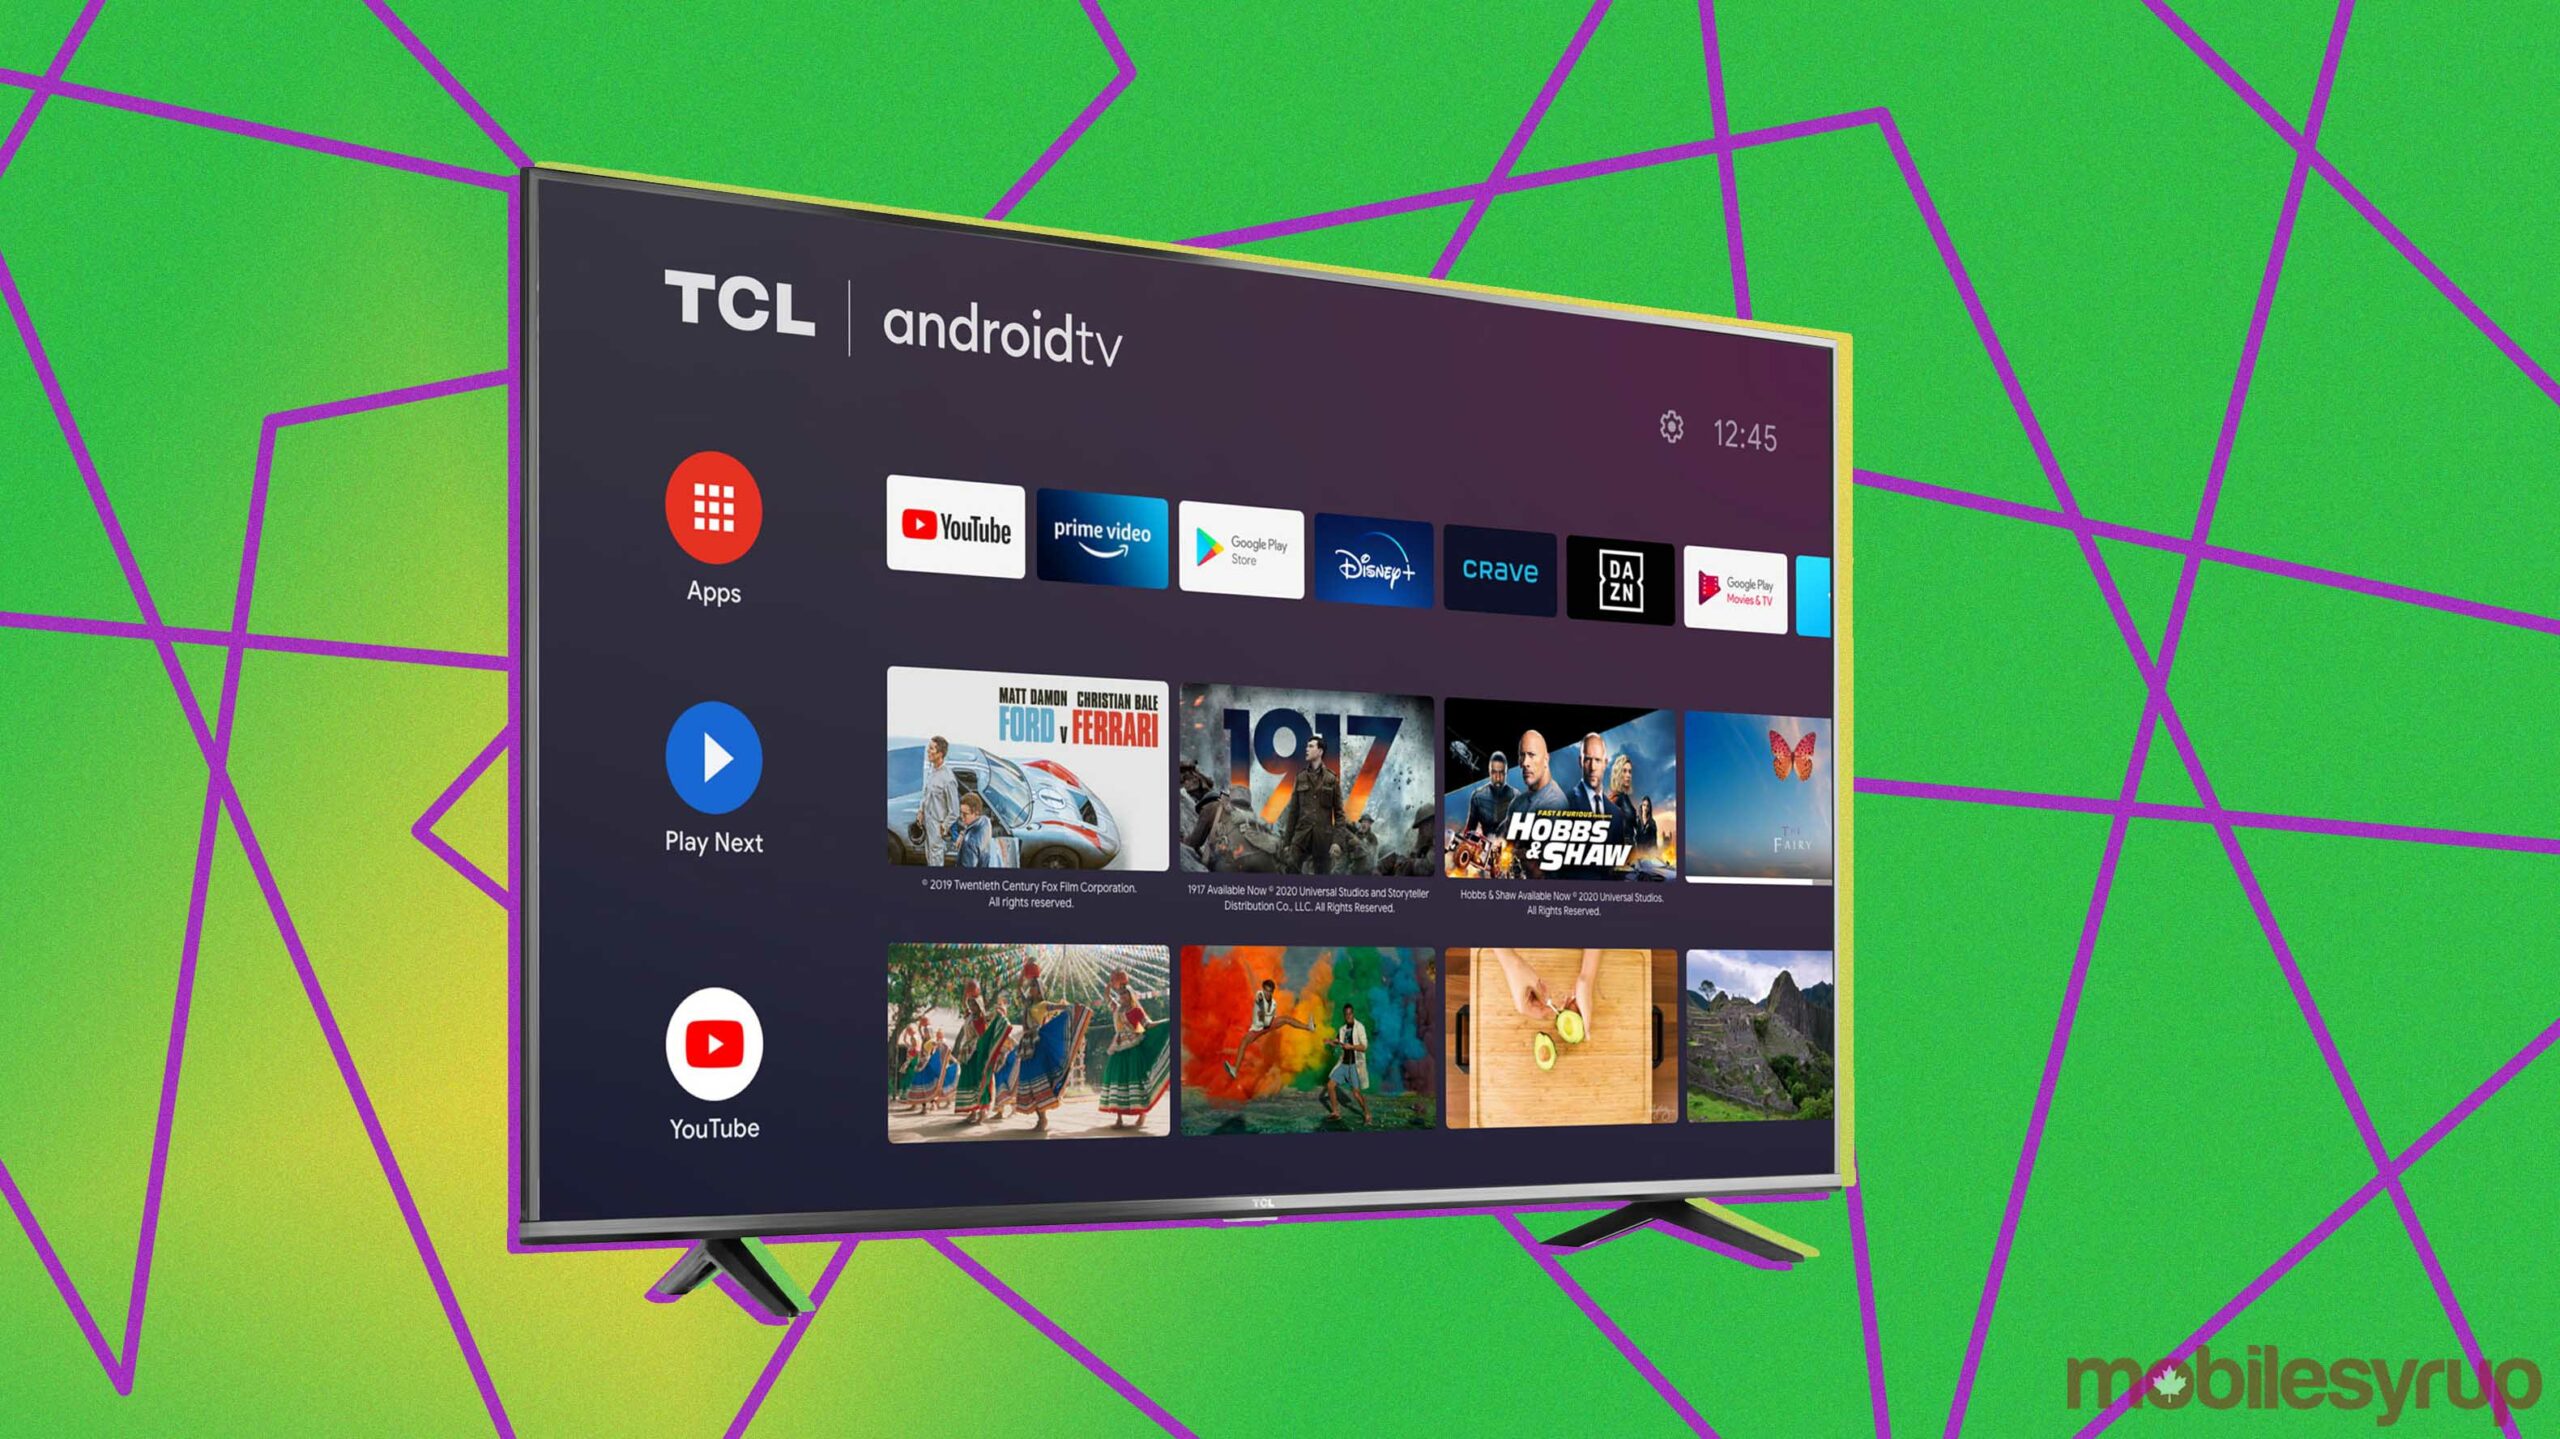 Tcl телевизор блютуз. TCL Android TV. ТСЛ телевизор андроид. TCL 40se. Android TV TCL за 11 000.